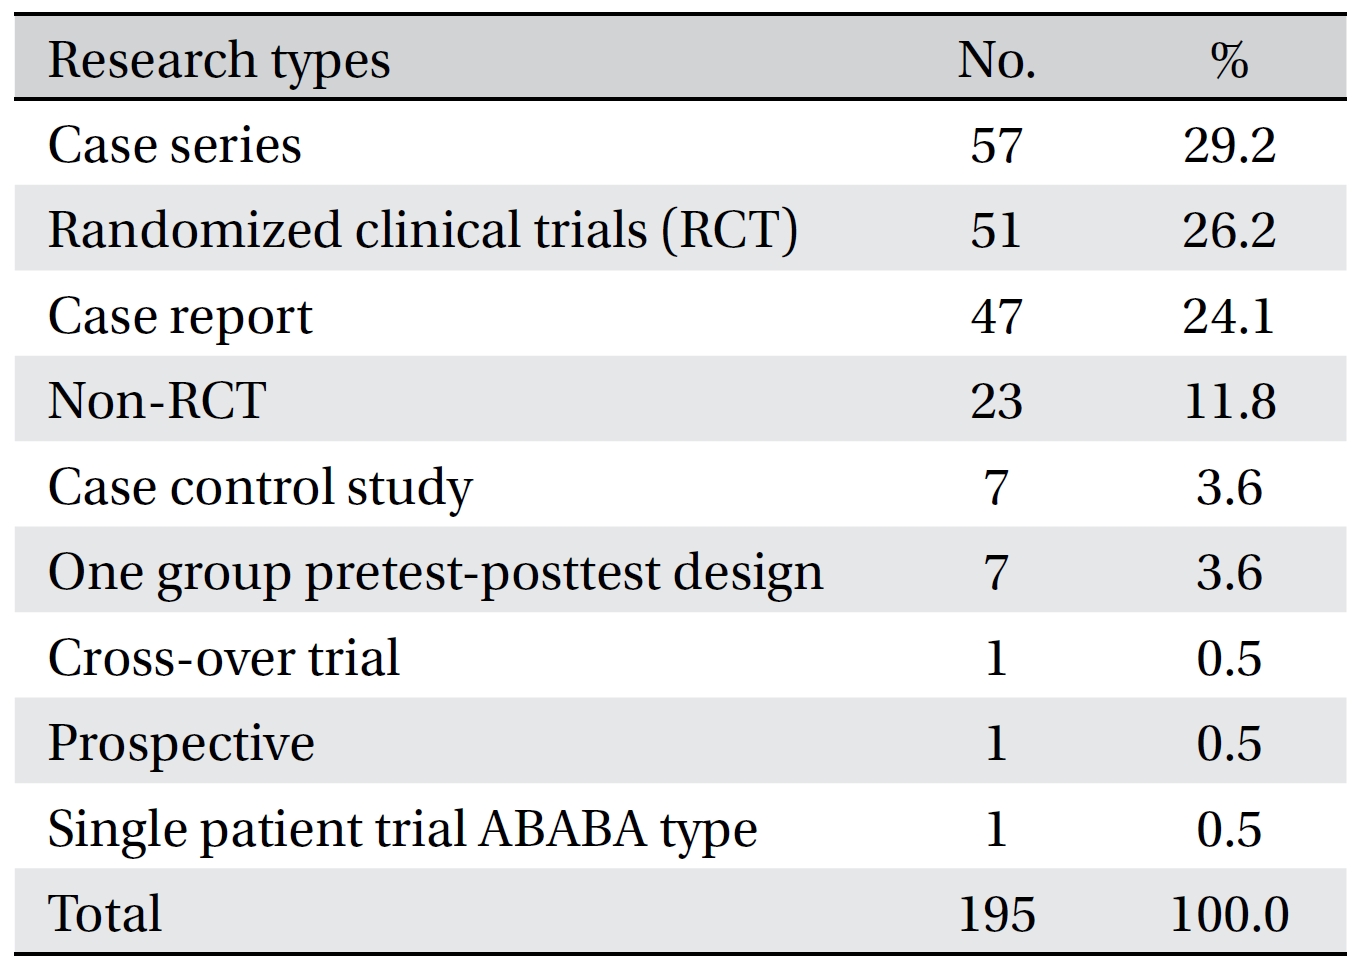 Research types on clinical studies